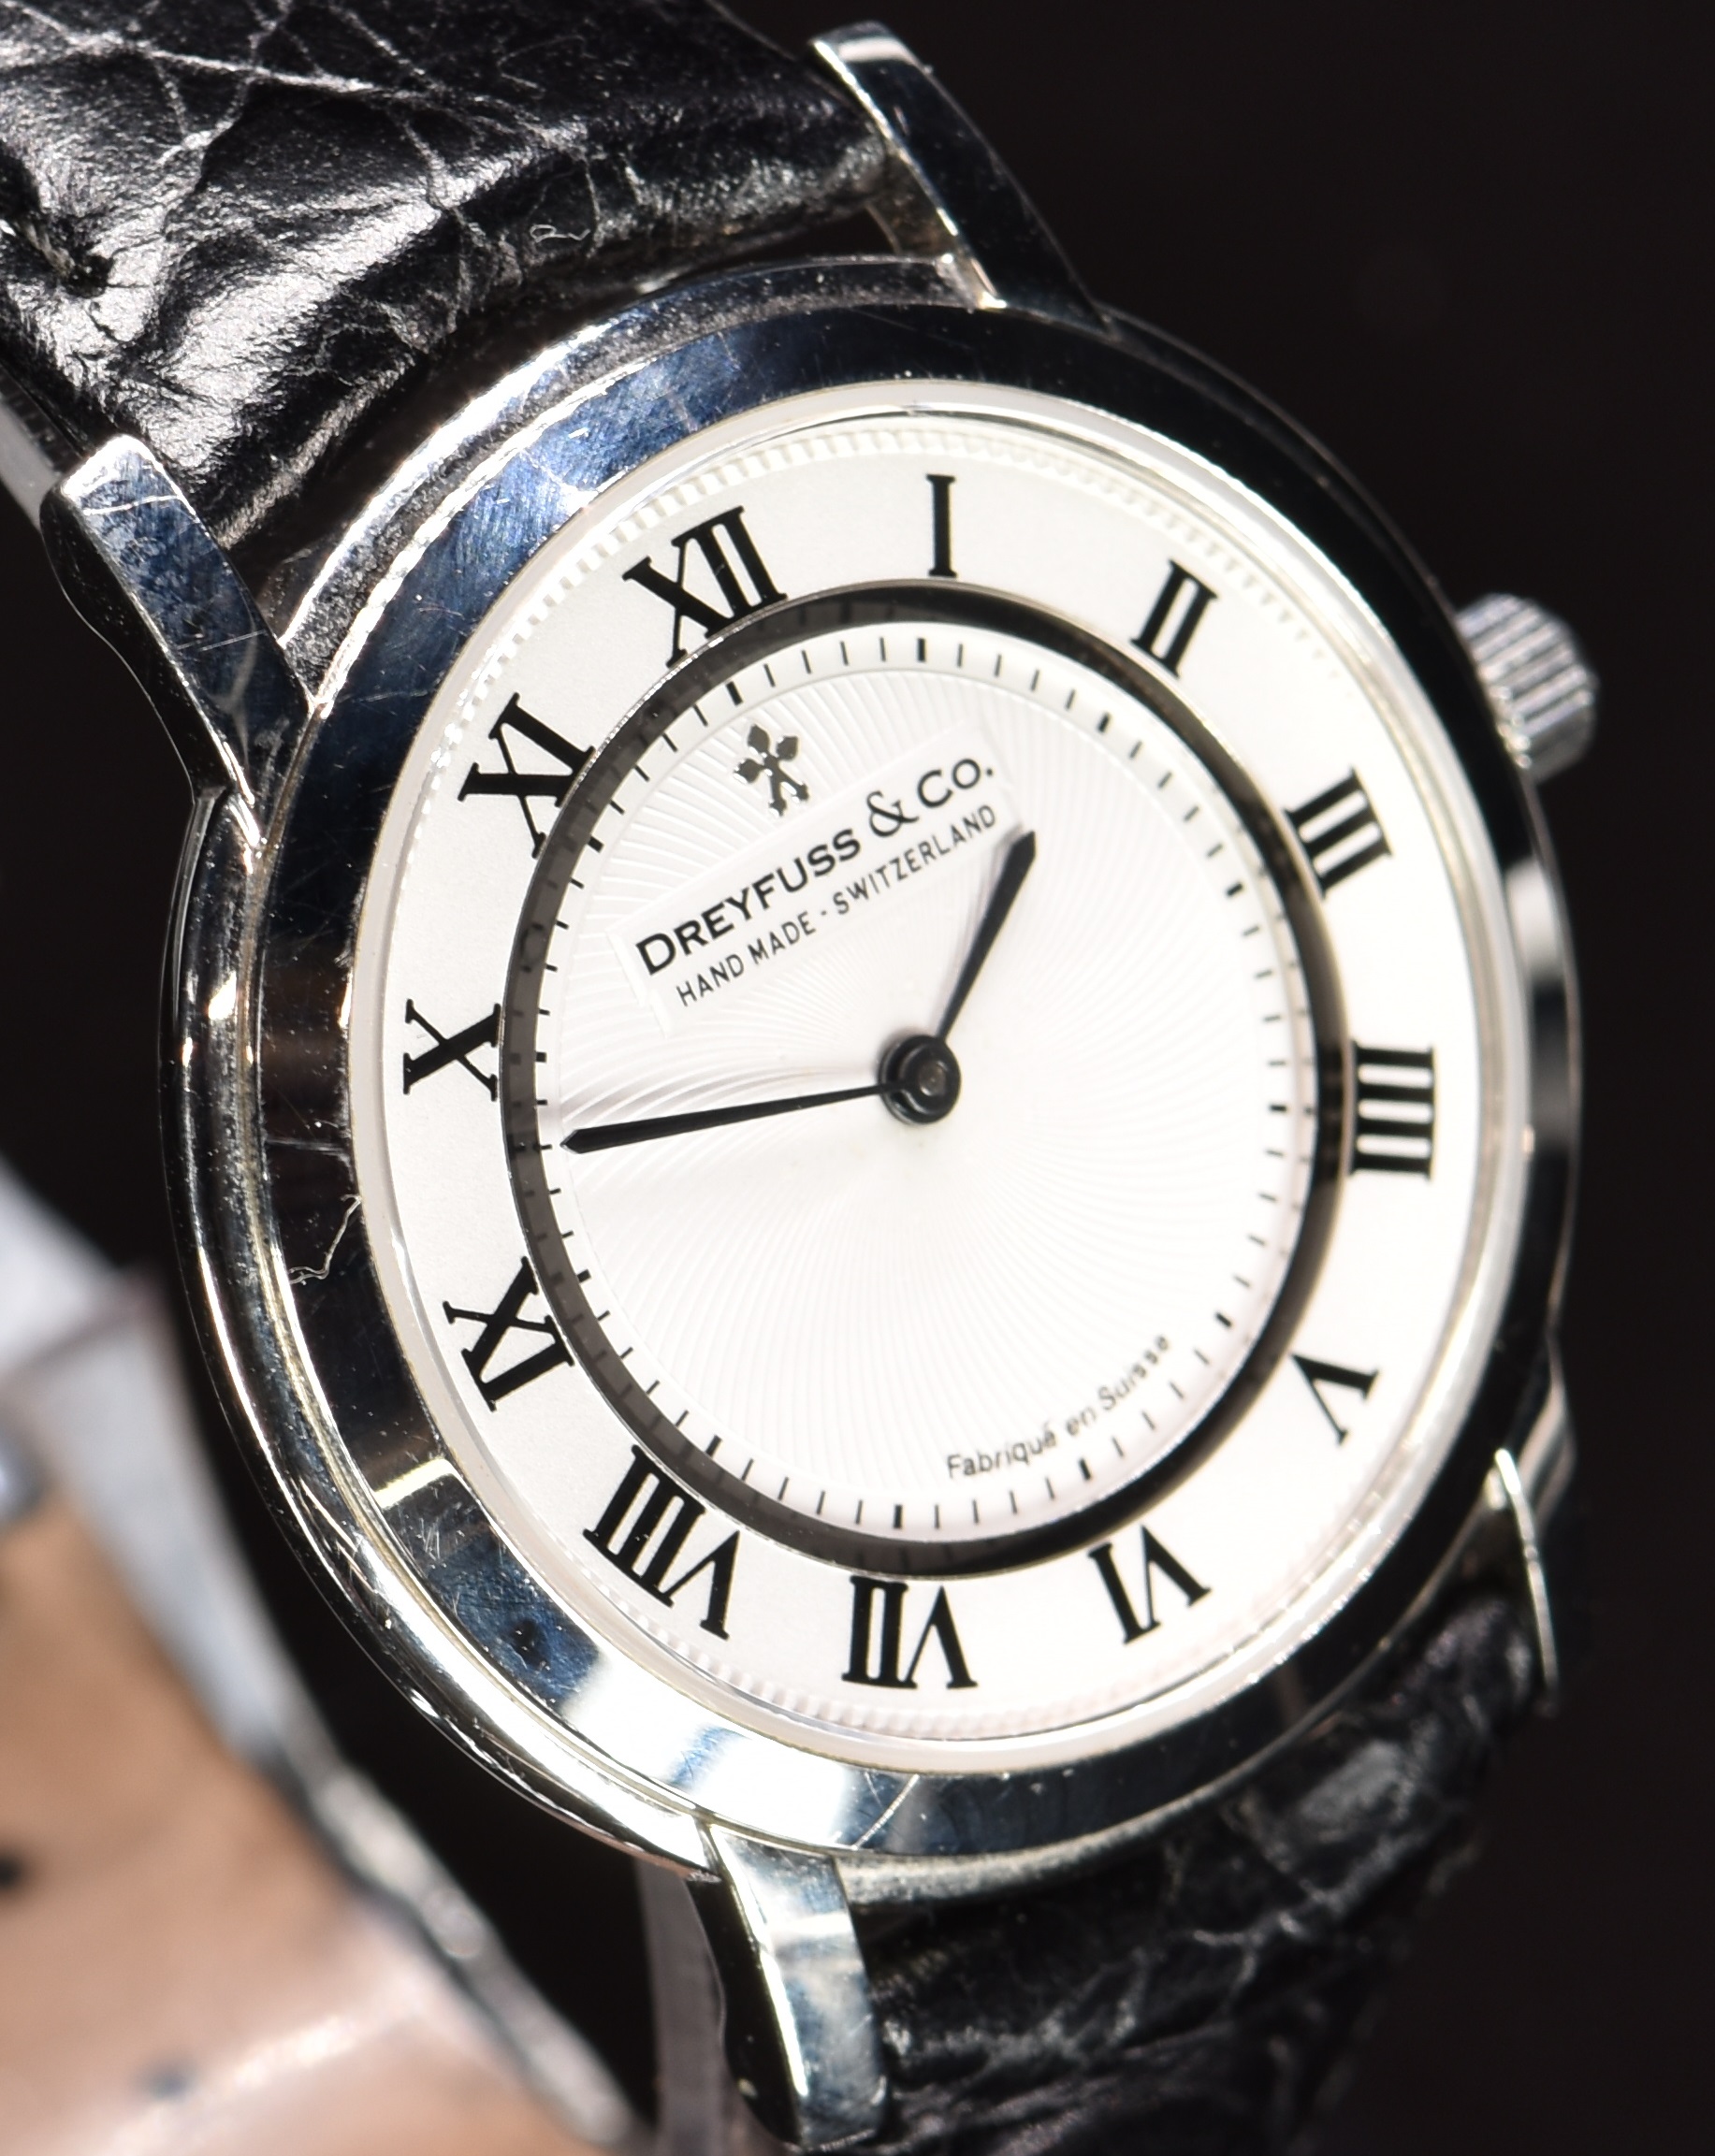 Dreyfuss & Co gentleman's wristwatch with blued hands, black Roman numerals, white dial, stainless - Image 3 of 6